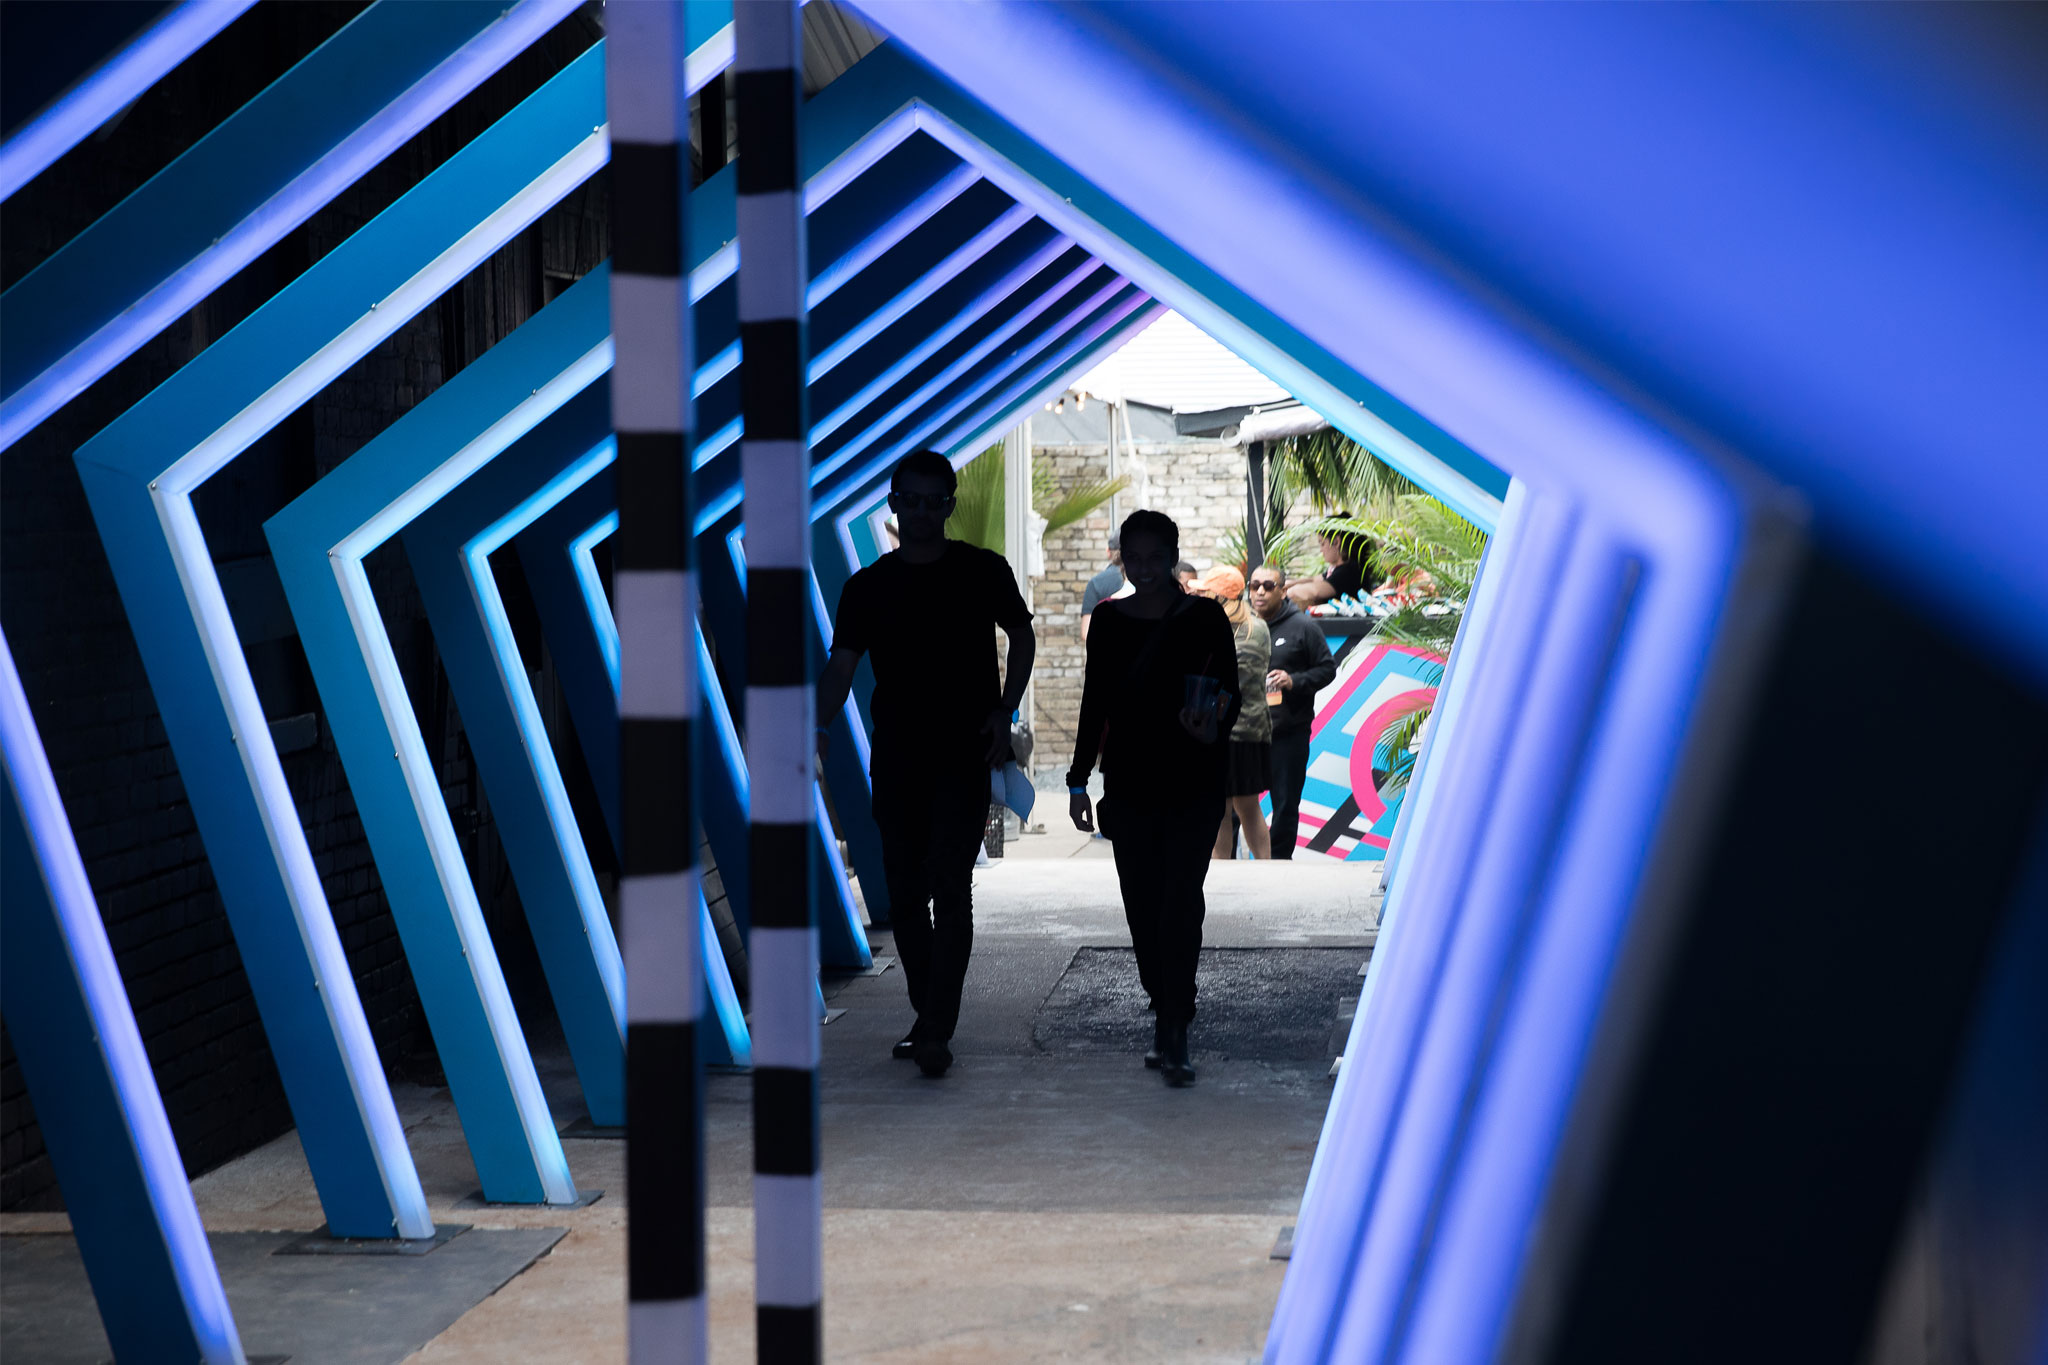 Picture of event attendees going through the LED exit tunnel.